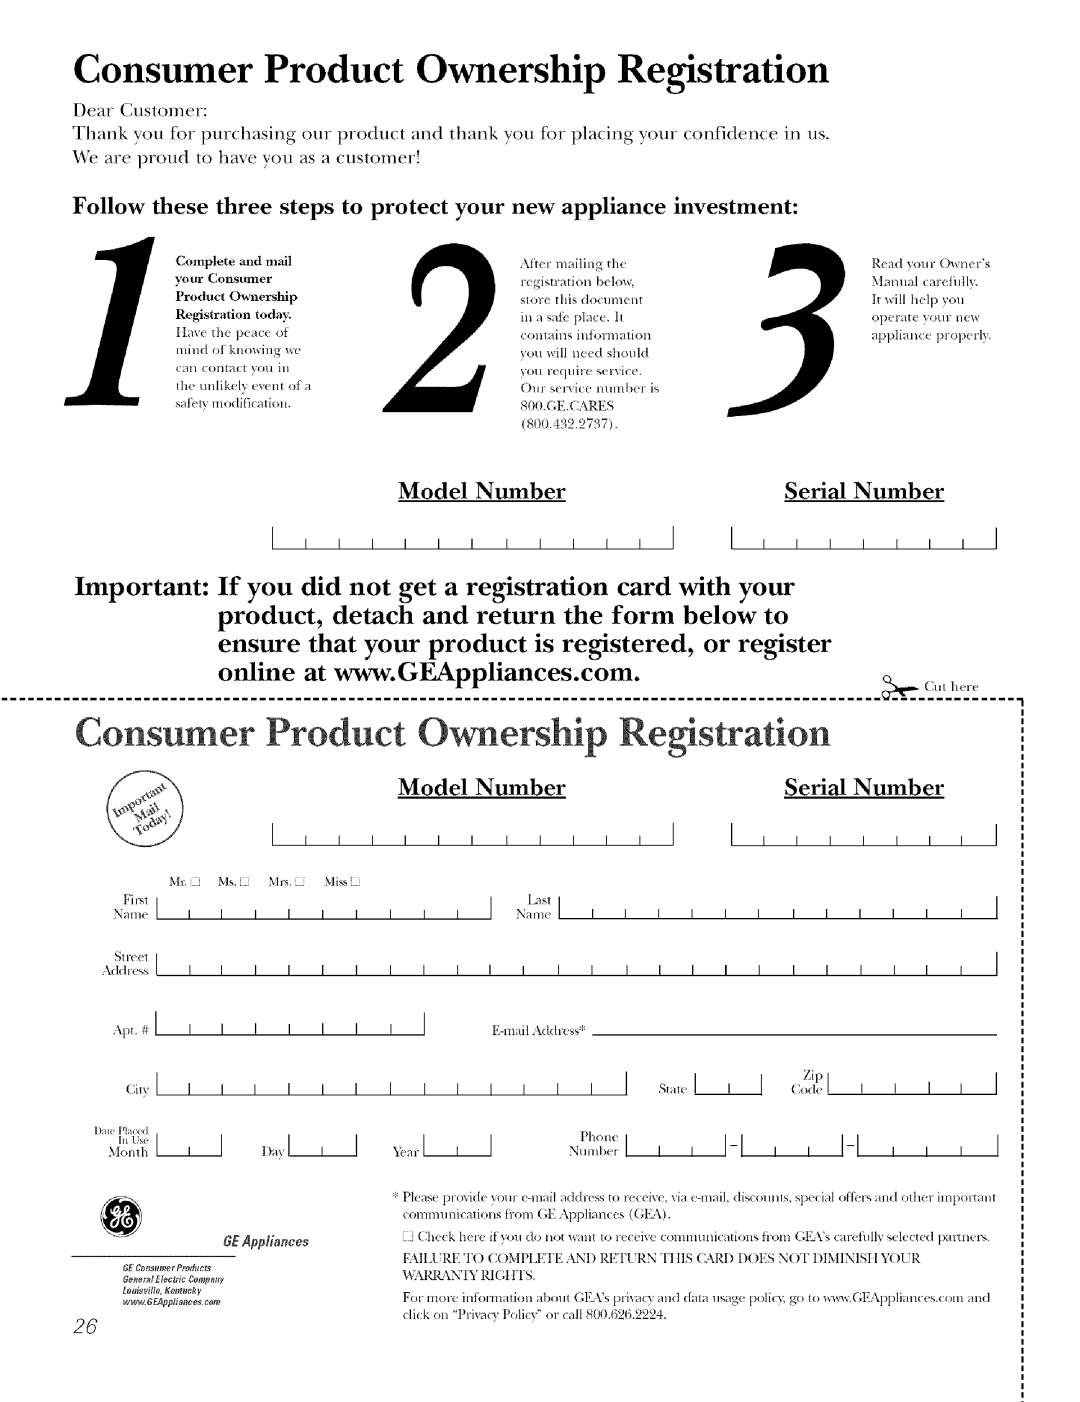 GE Range Serial, Consumer Product Ownership Registration, i,vI, pl, product, detach and return the form below to, Model 